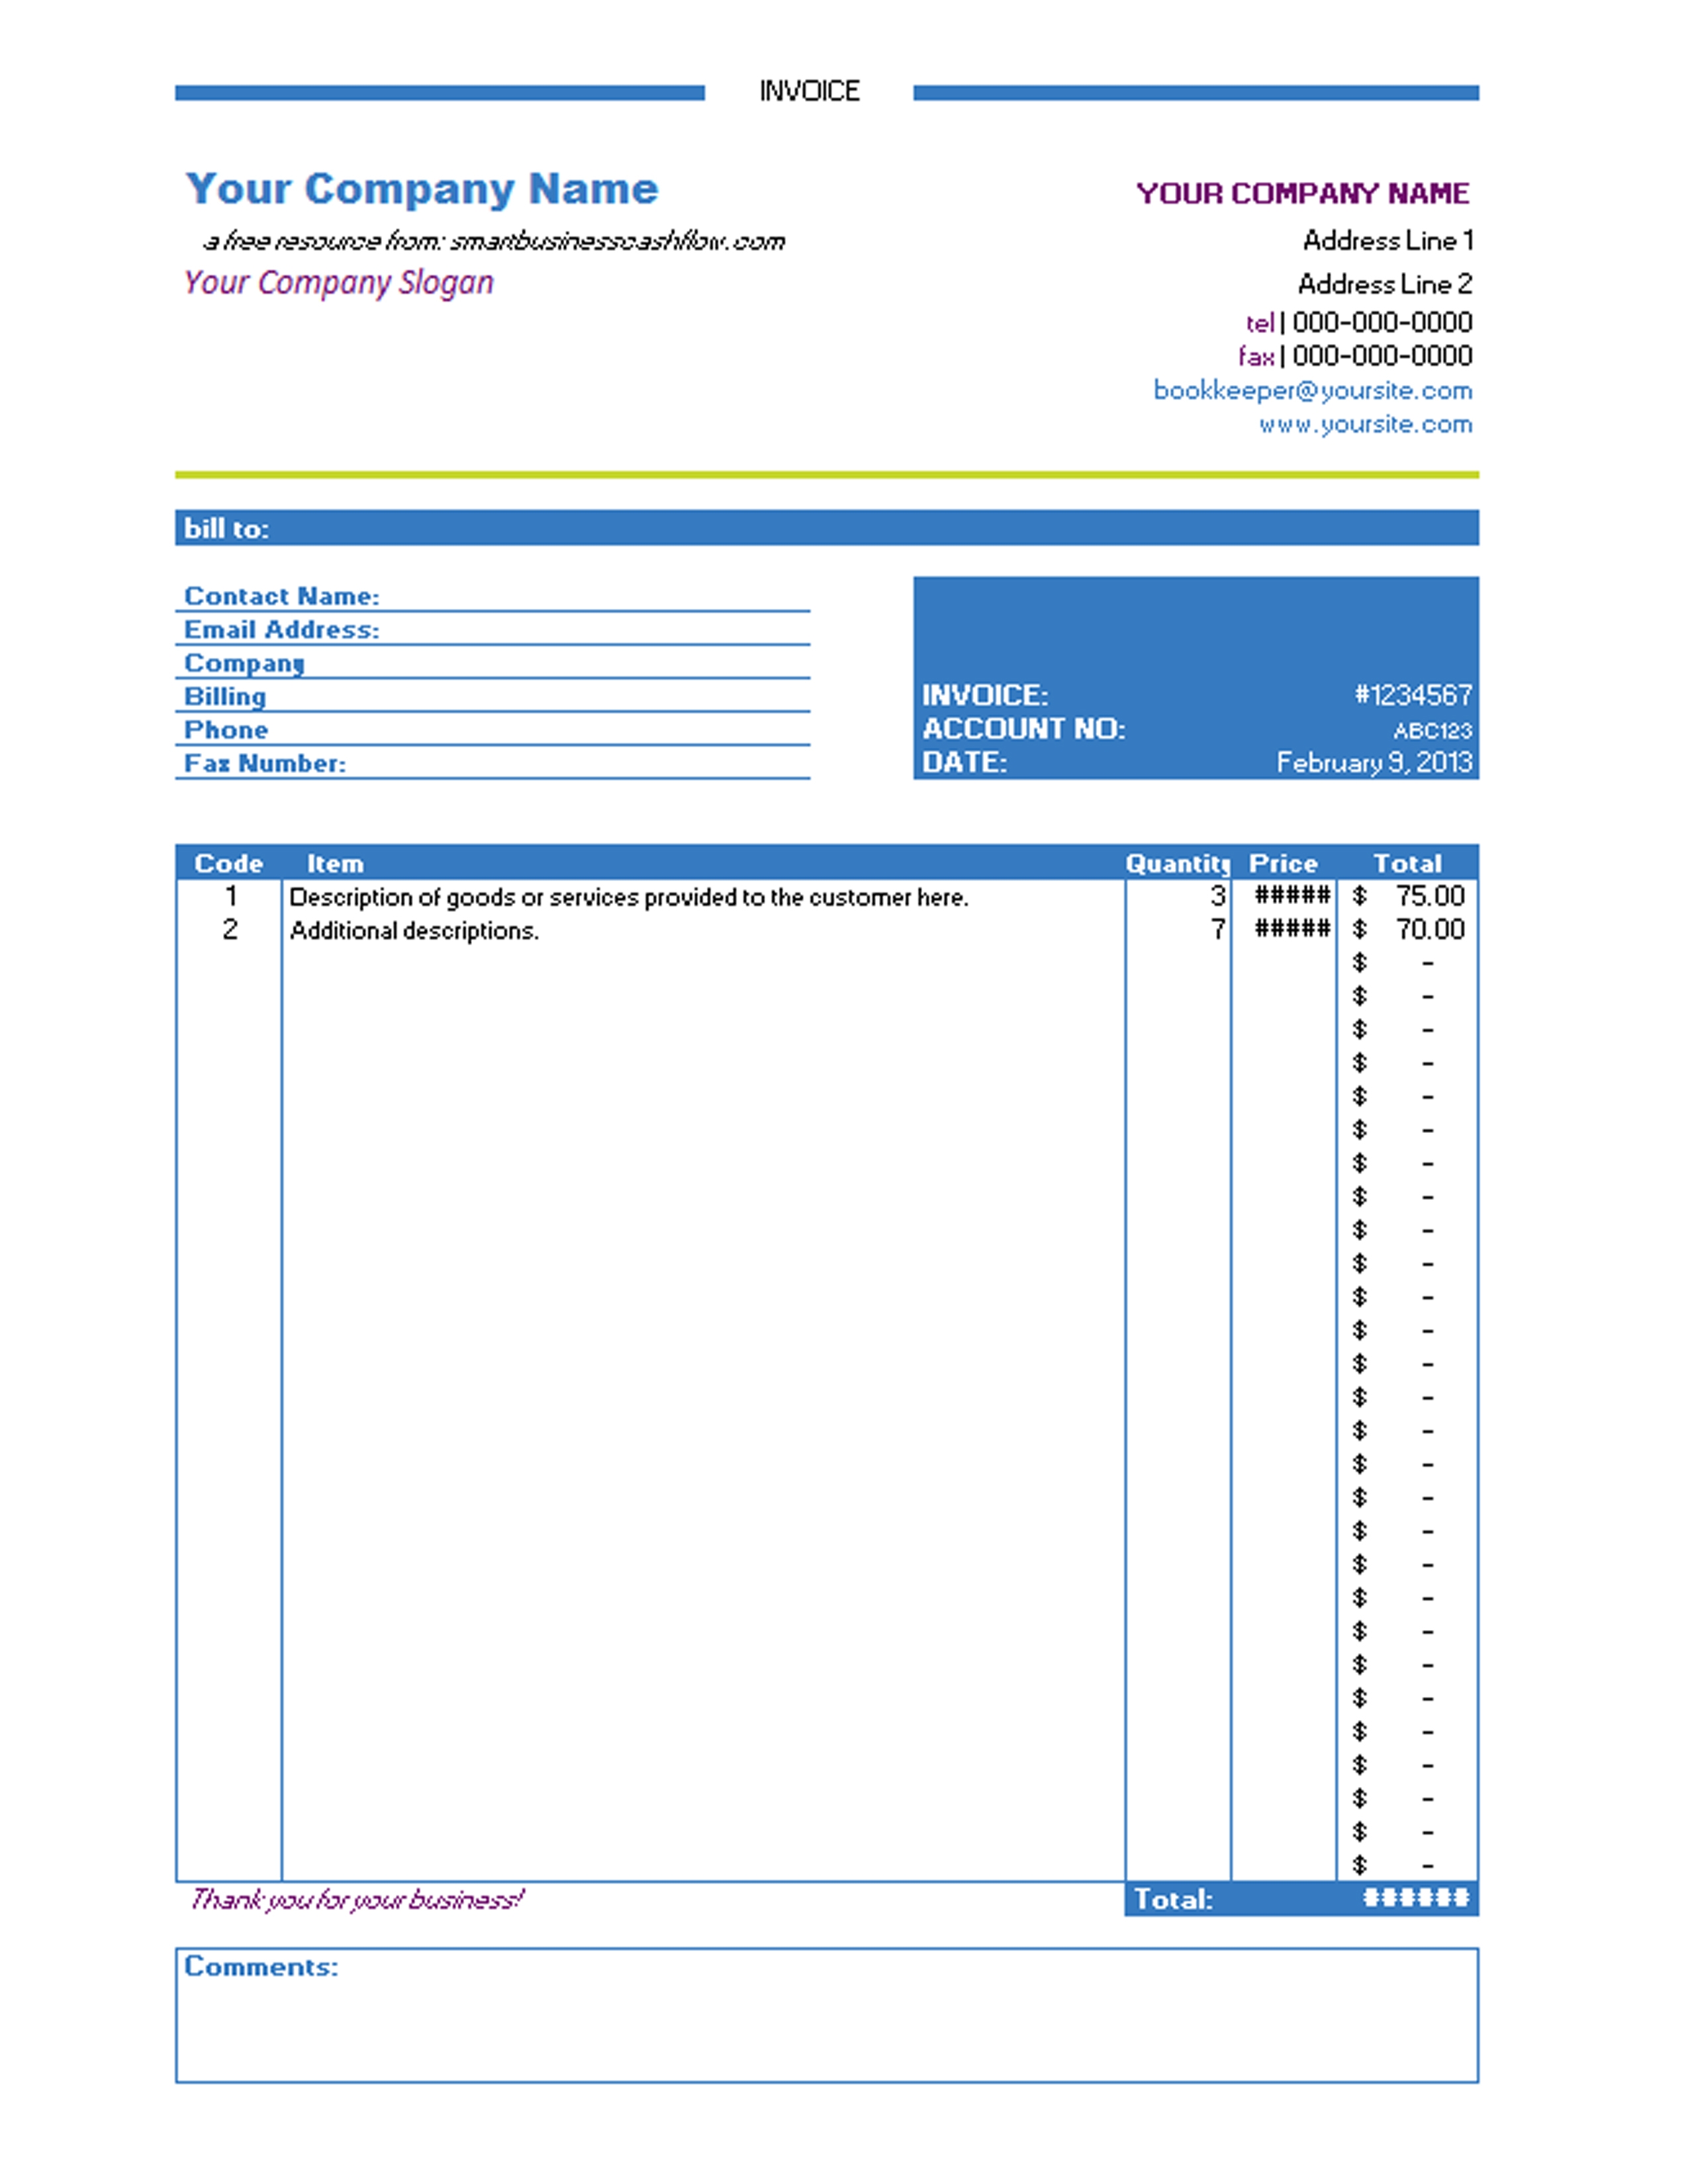 invoice template in excel free printable invoice invoice templates for excel